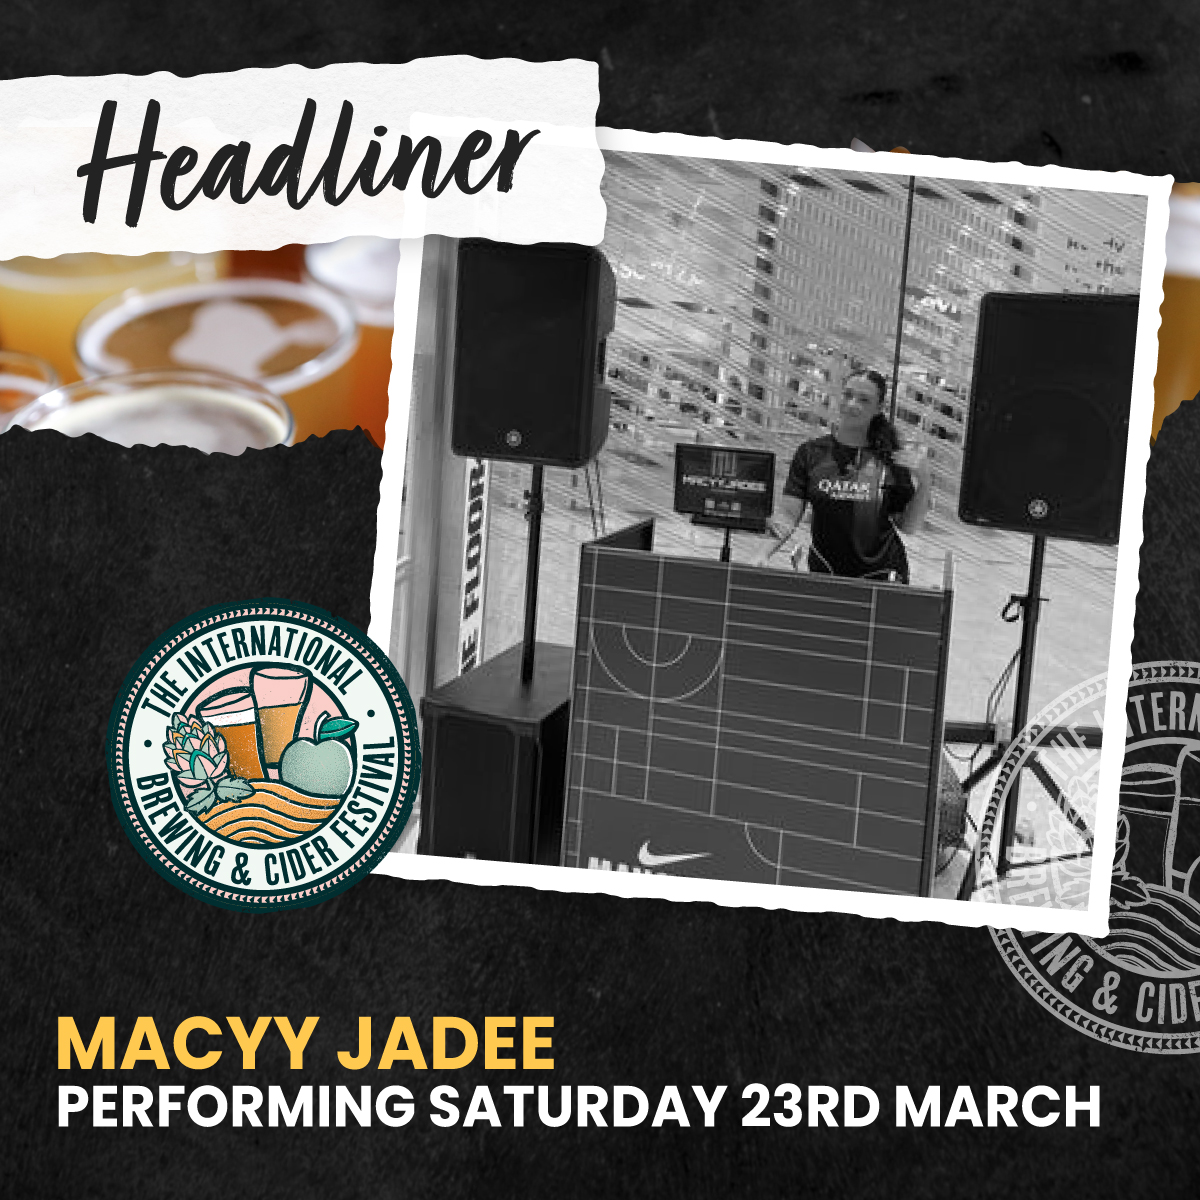 🎶 𝐀𝐑𝐓𝐈𝐒𝐓 𝐒𝐏𝐎𝐓𝐋𝐈𝐆𝐇𝐓 🔥 We’re thrilled to announce @MacyyJadeeDJ as your Saturday evening headliner at this year’s #IBCFest! Macyy Jadee is a female DJ from Manchester who loves to play all genres from old school hip hop to house to pop!